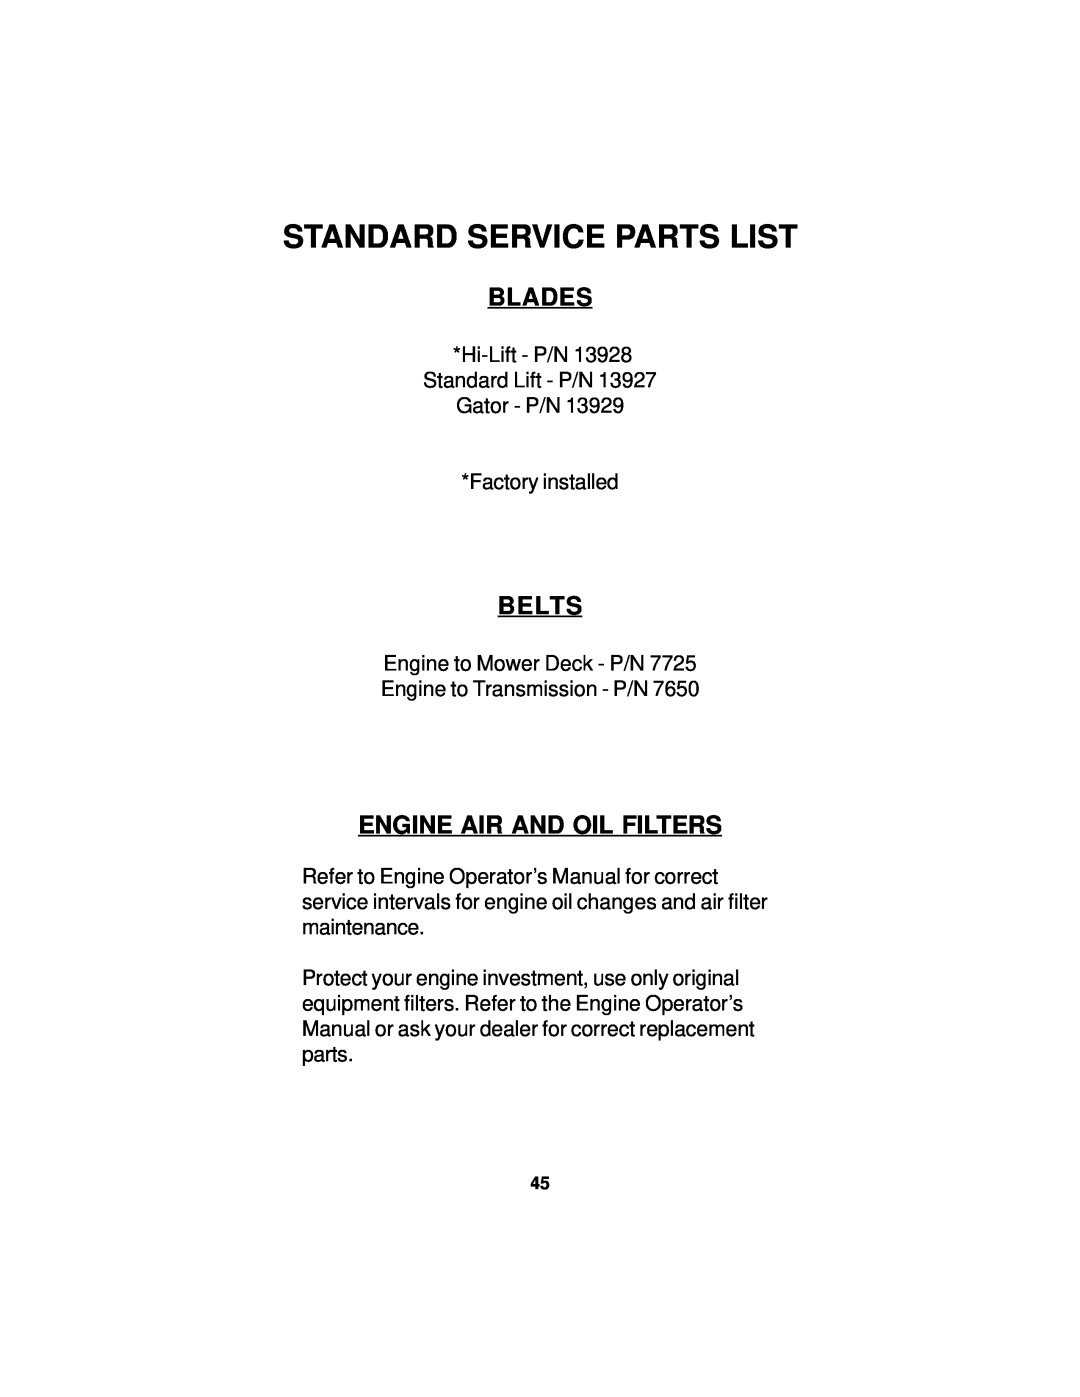 Dixon 14295-0804 manual Standard Service Parts List, Blades, Engine Air And Oil Filters, Belts 